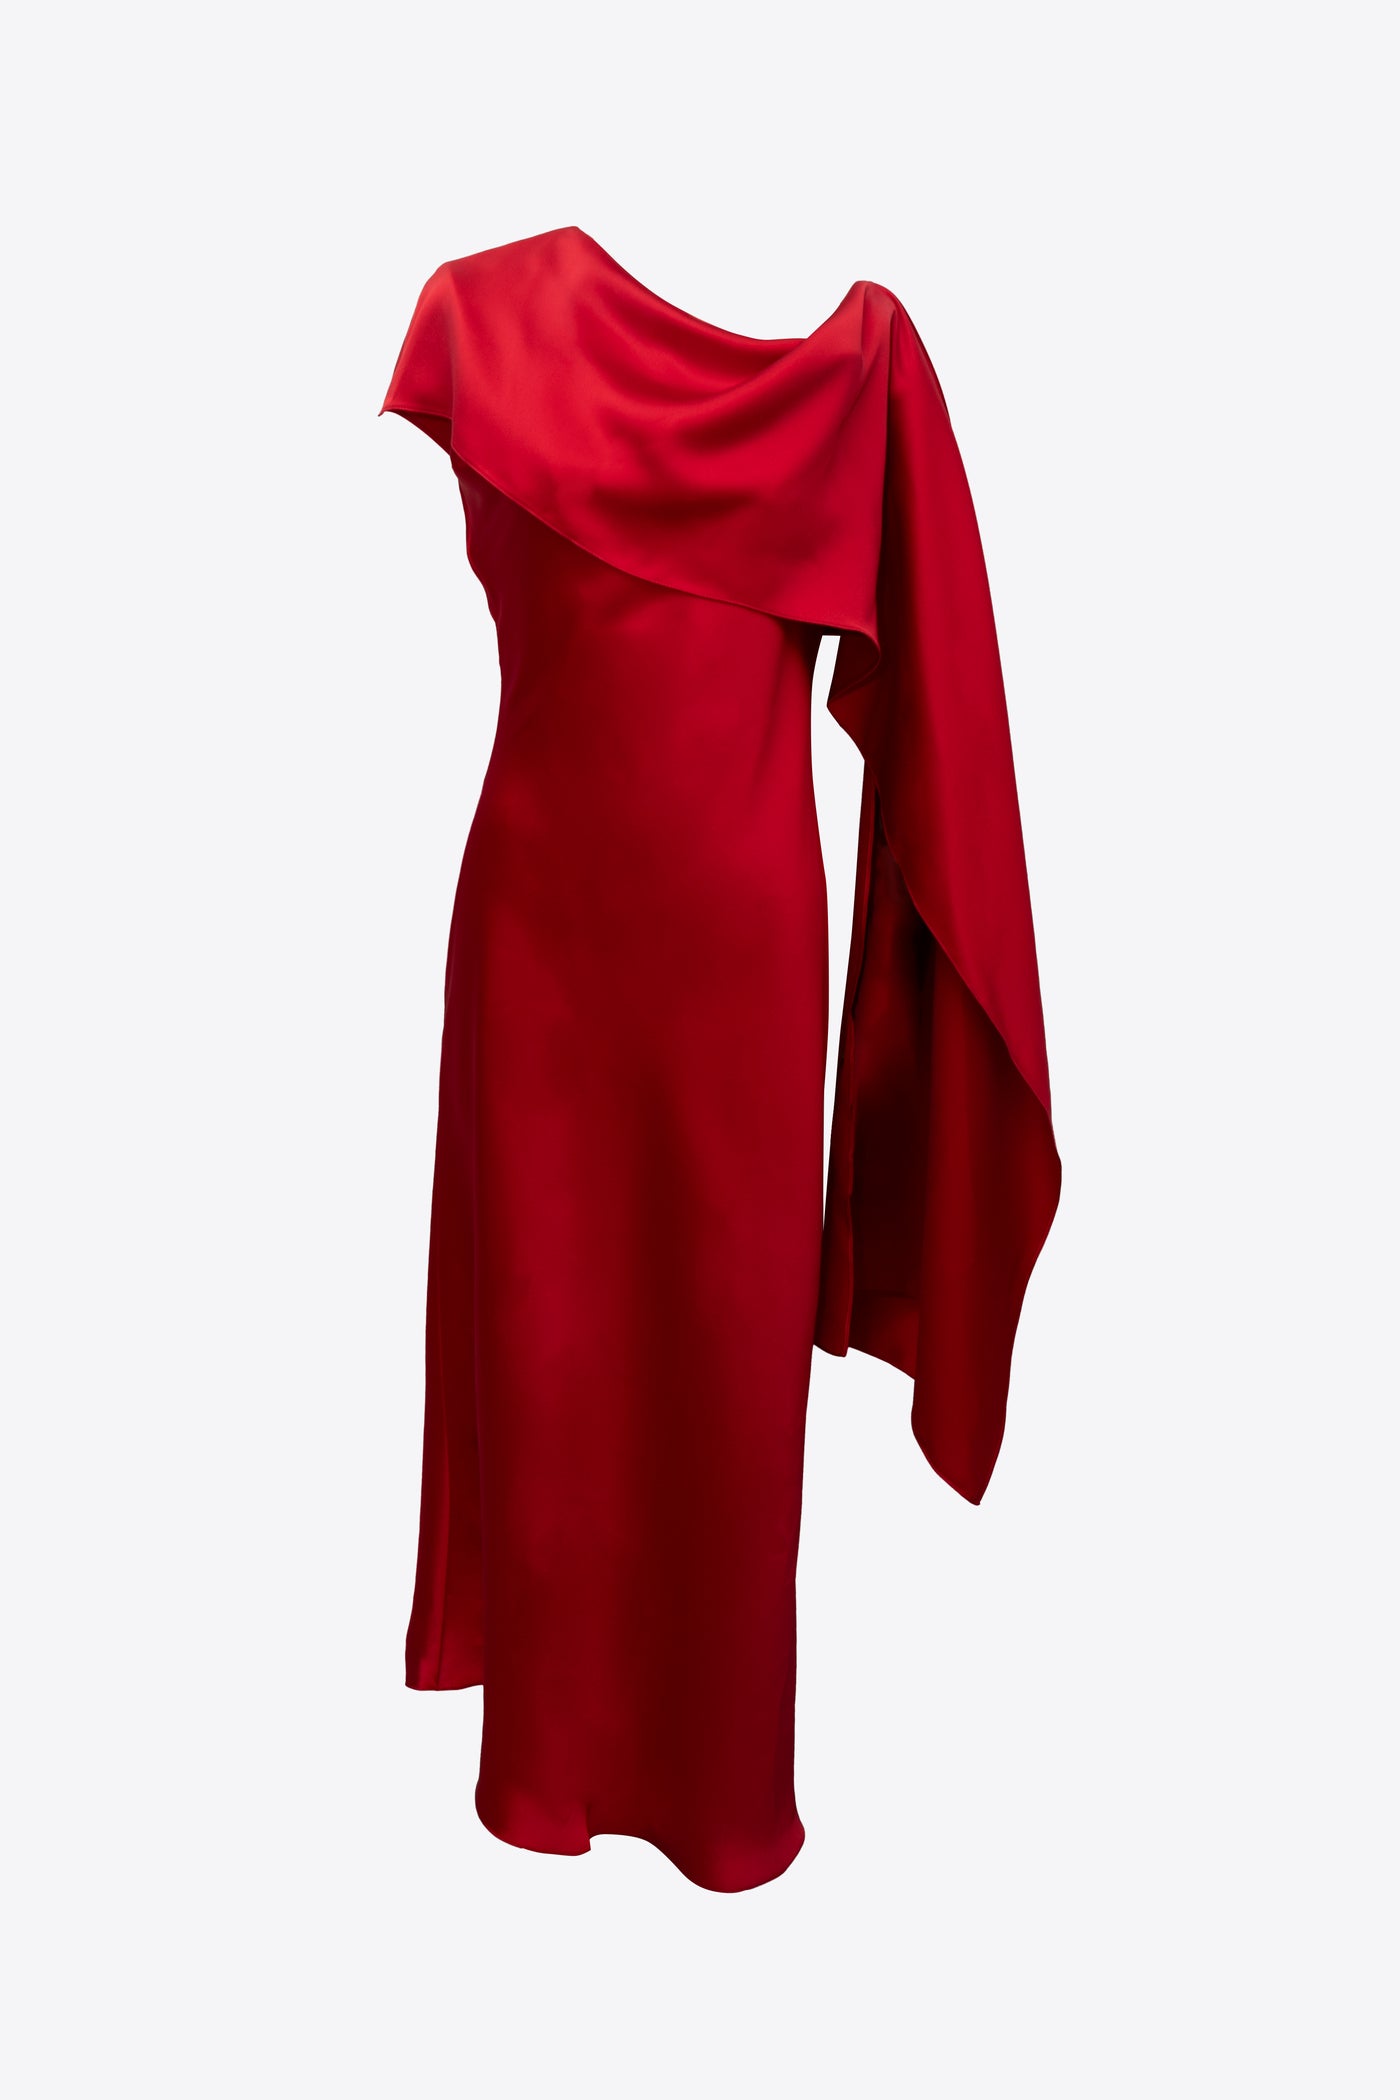 GRACE RED DRESS - PREORDER